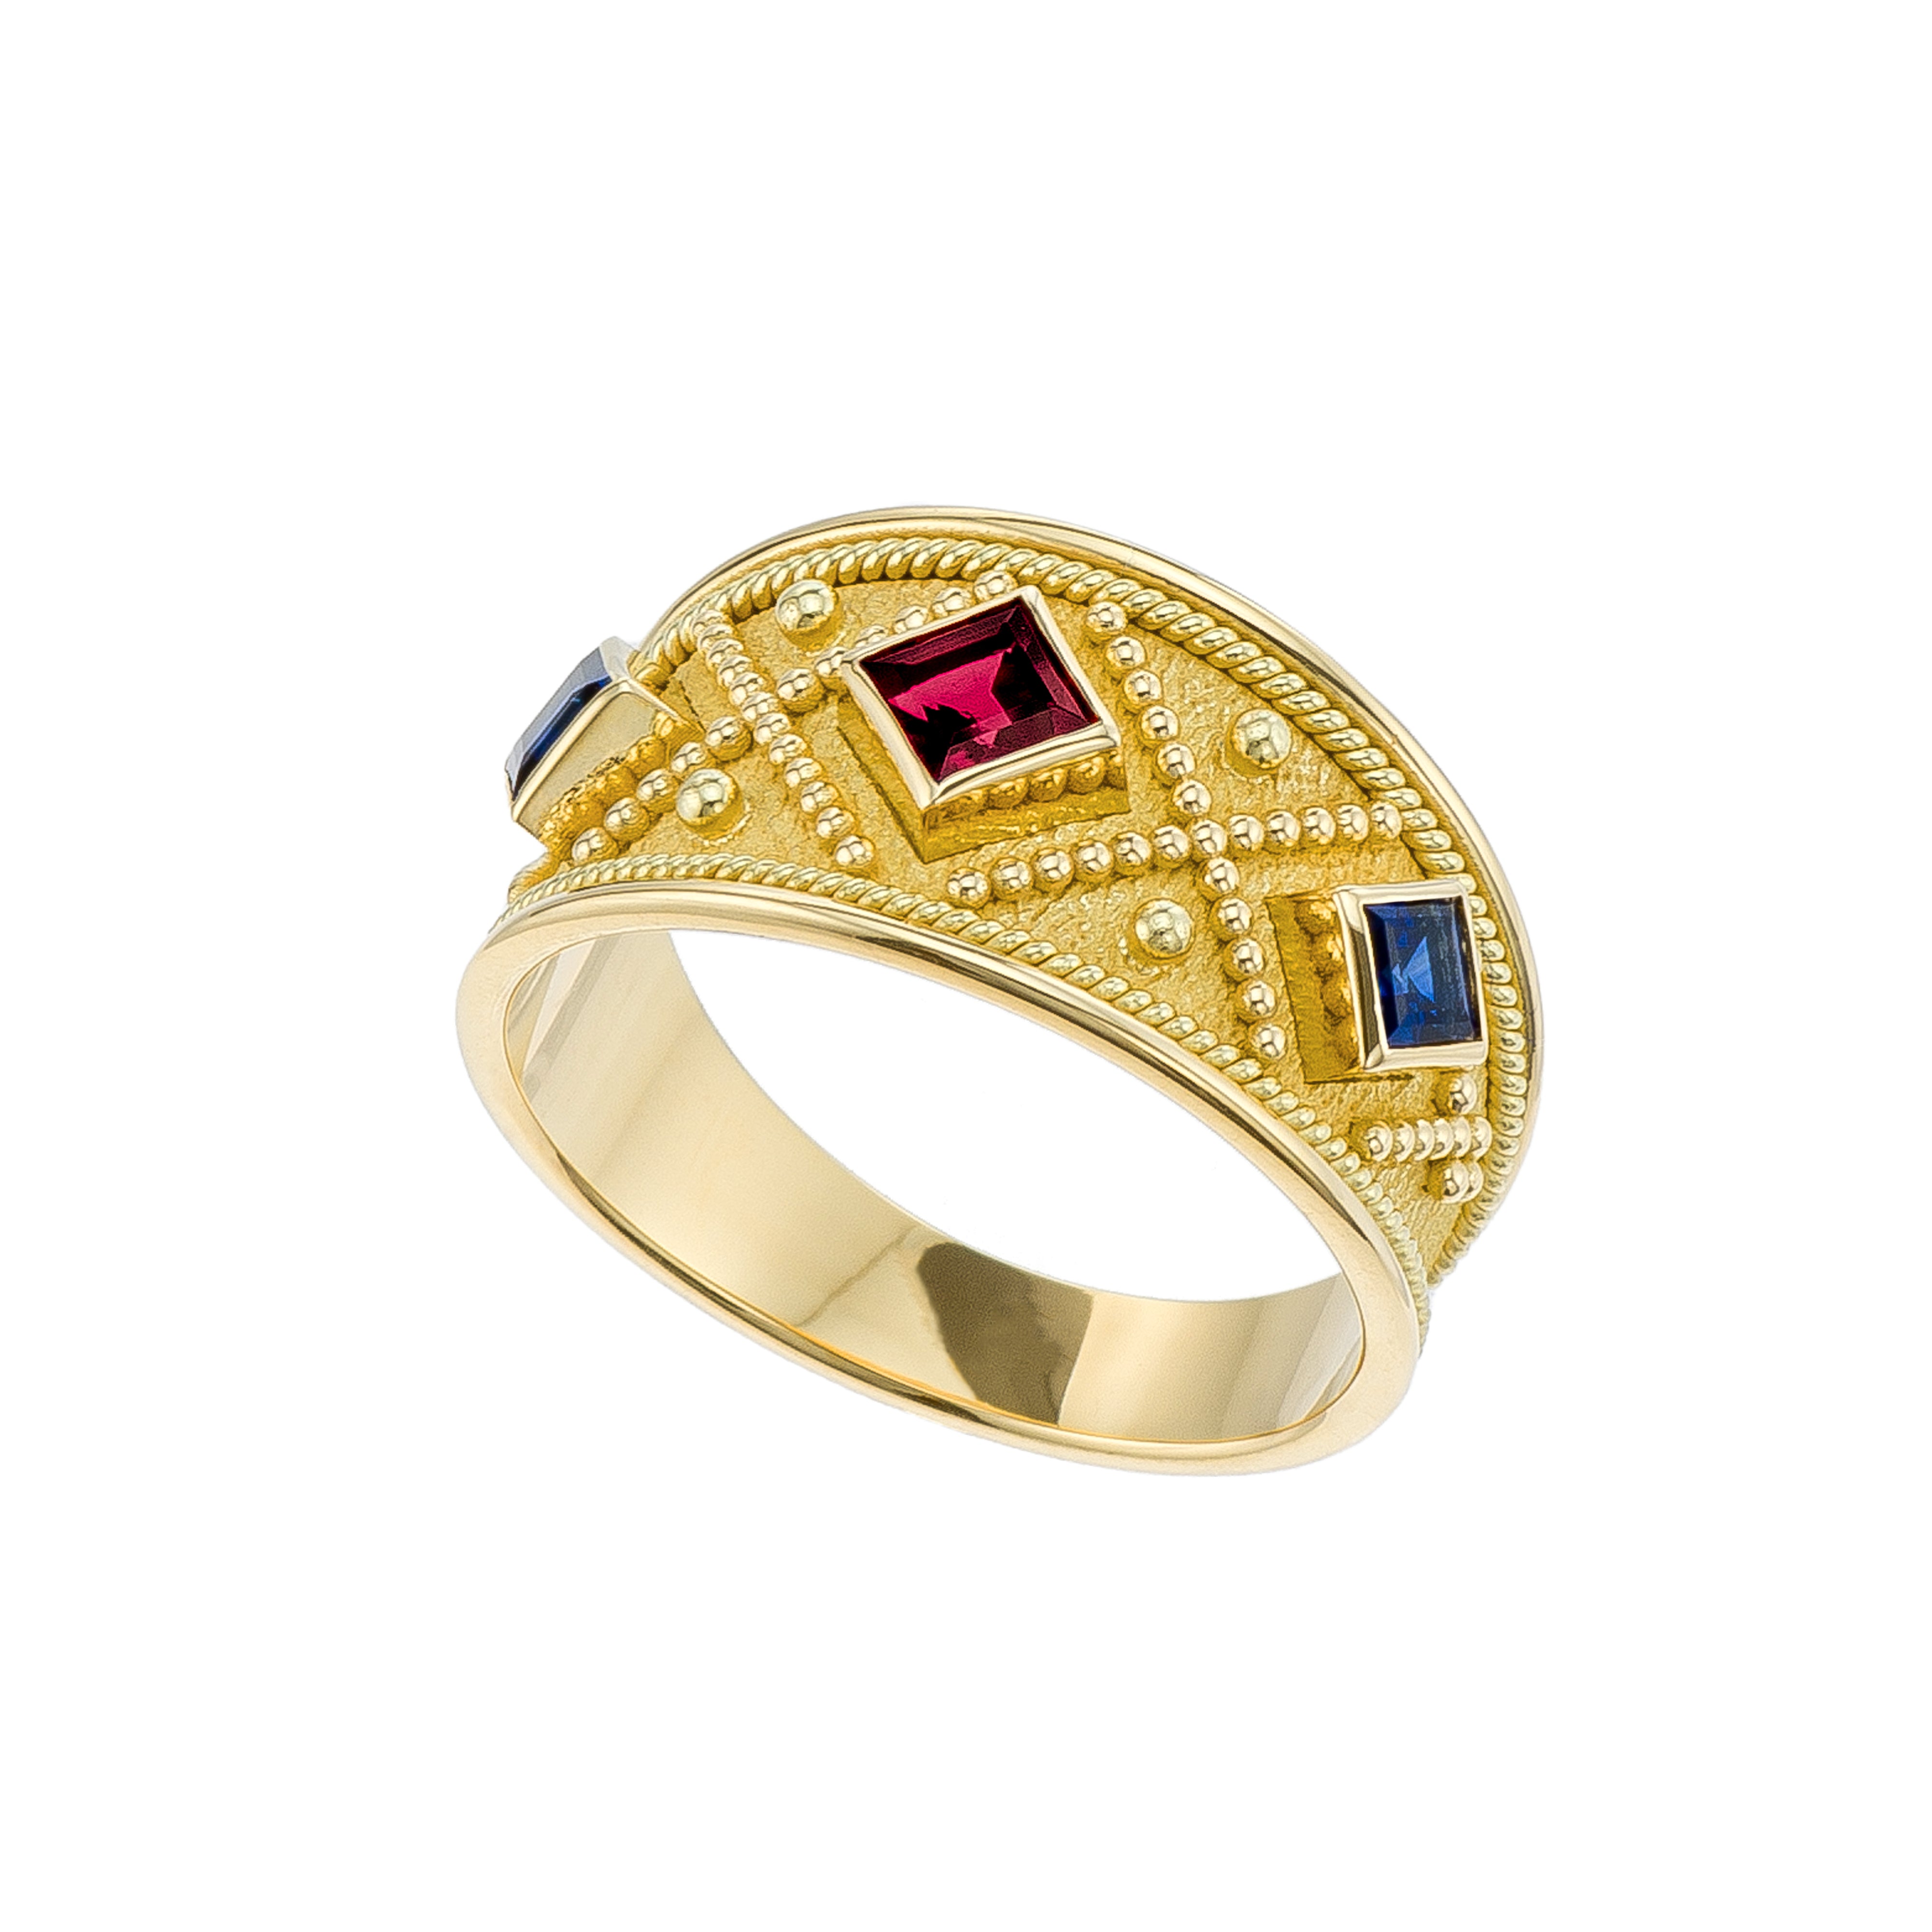 Byzantine Gold Ring with Ruby and Sapphires Odysseus Jewelry